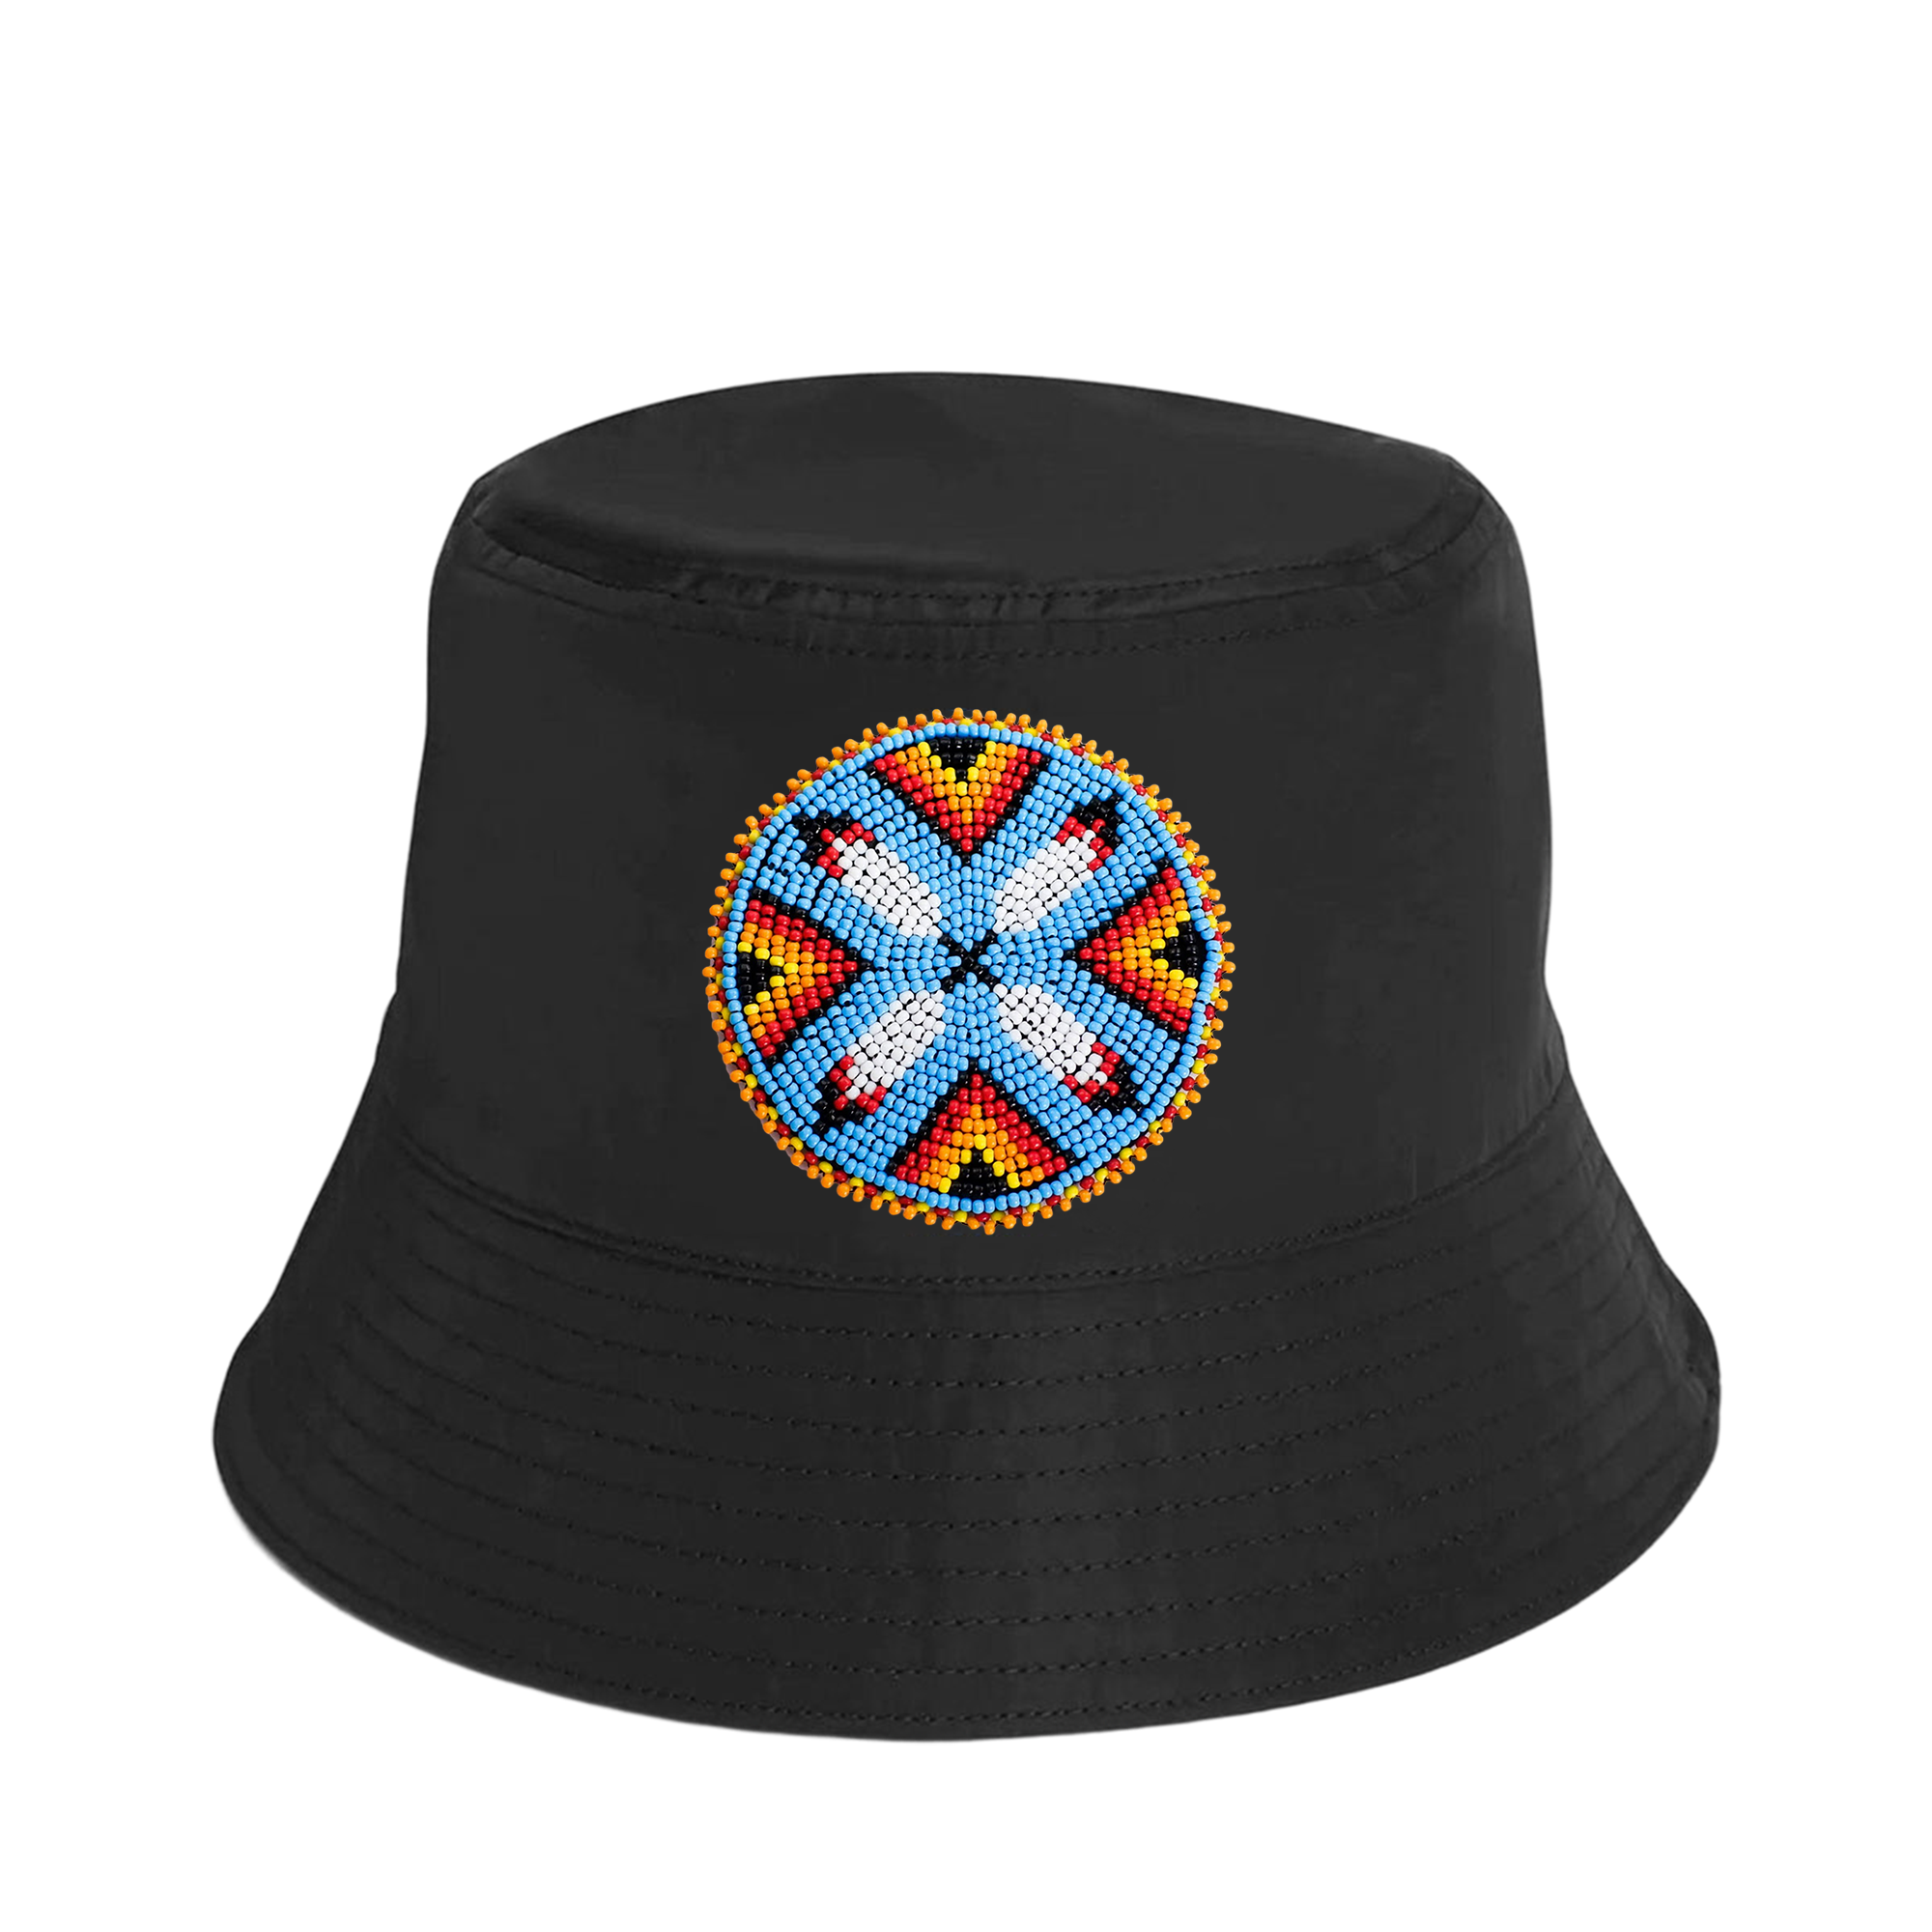 SALE 50% OFF - Four Feather Beaded Unisex Cotton Bucket Hat with Native American